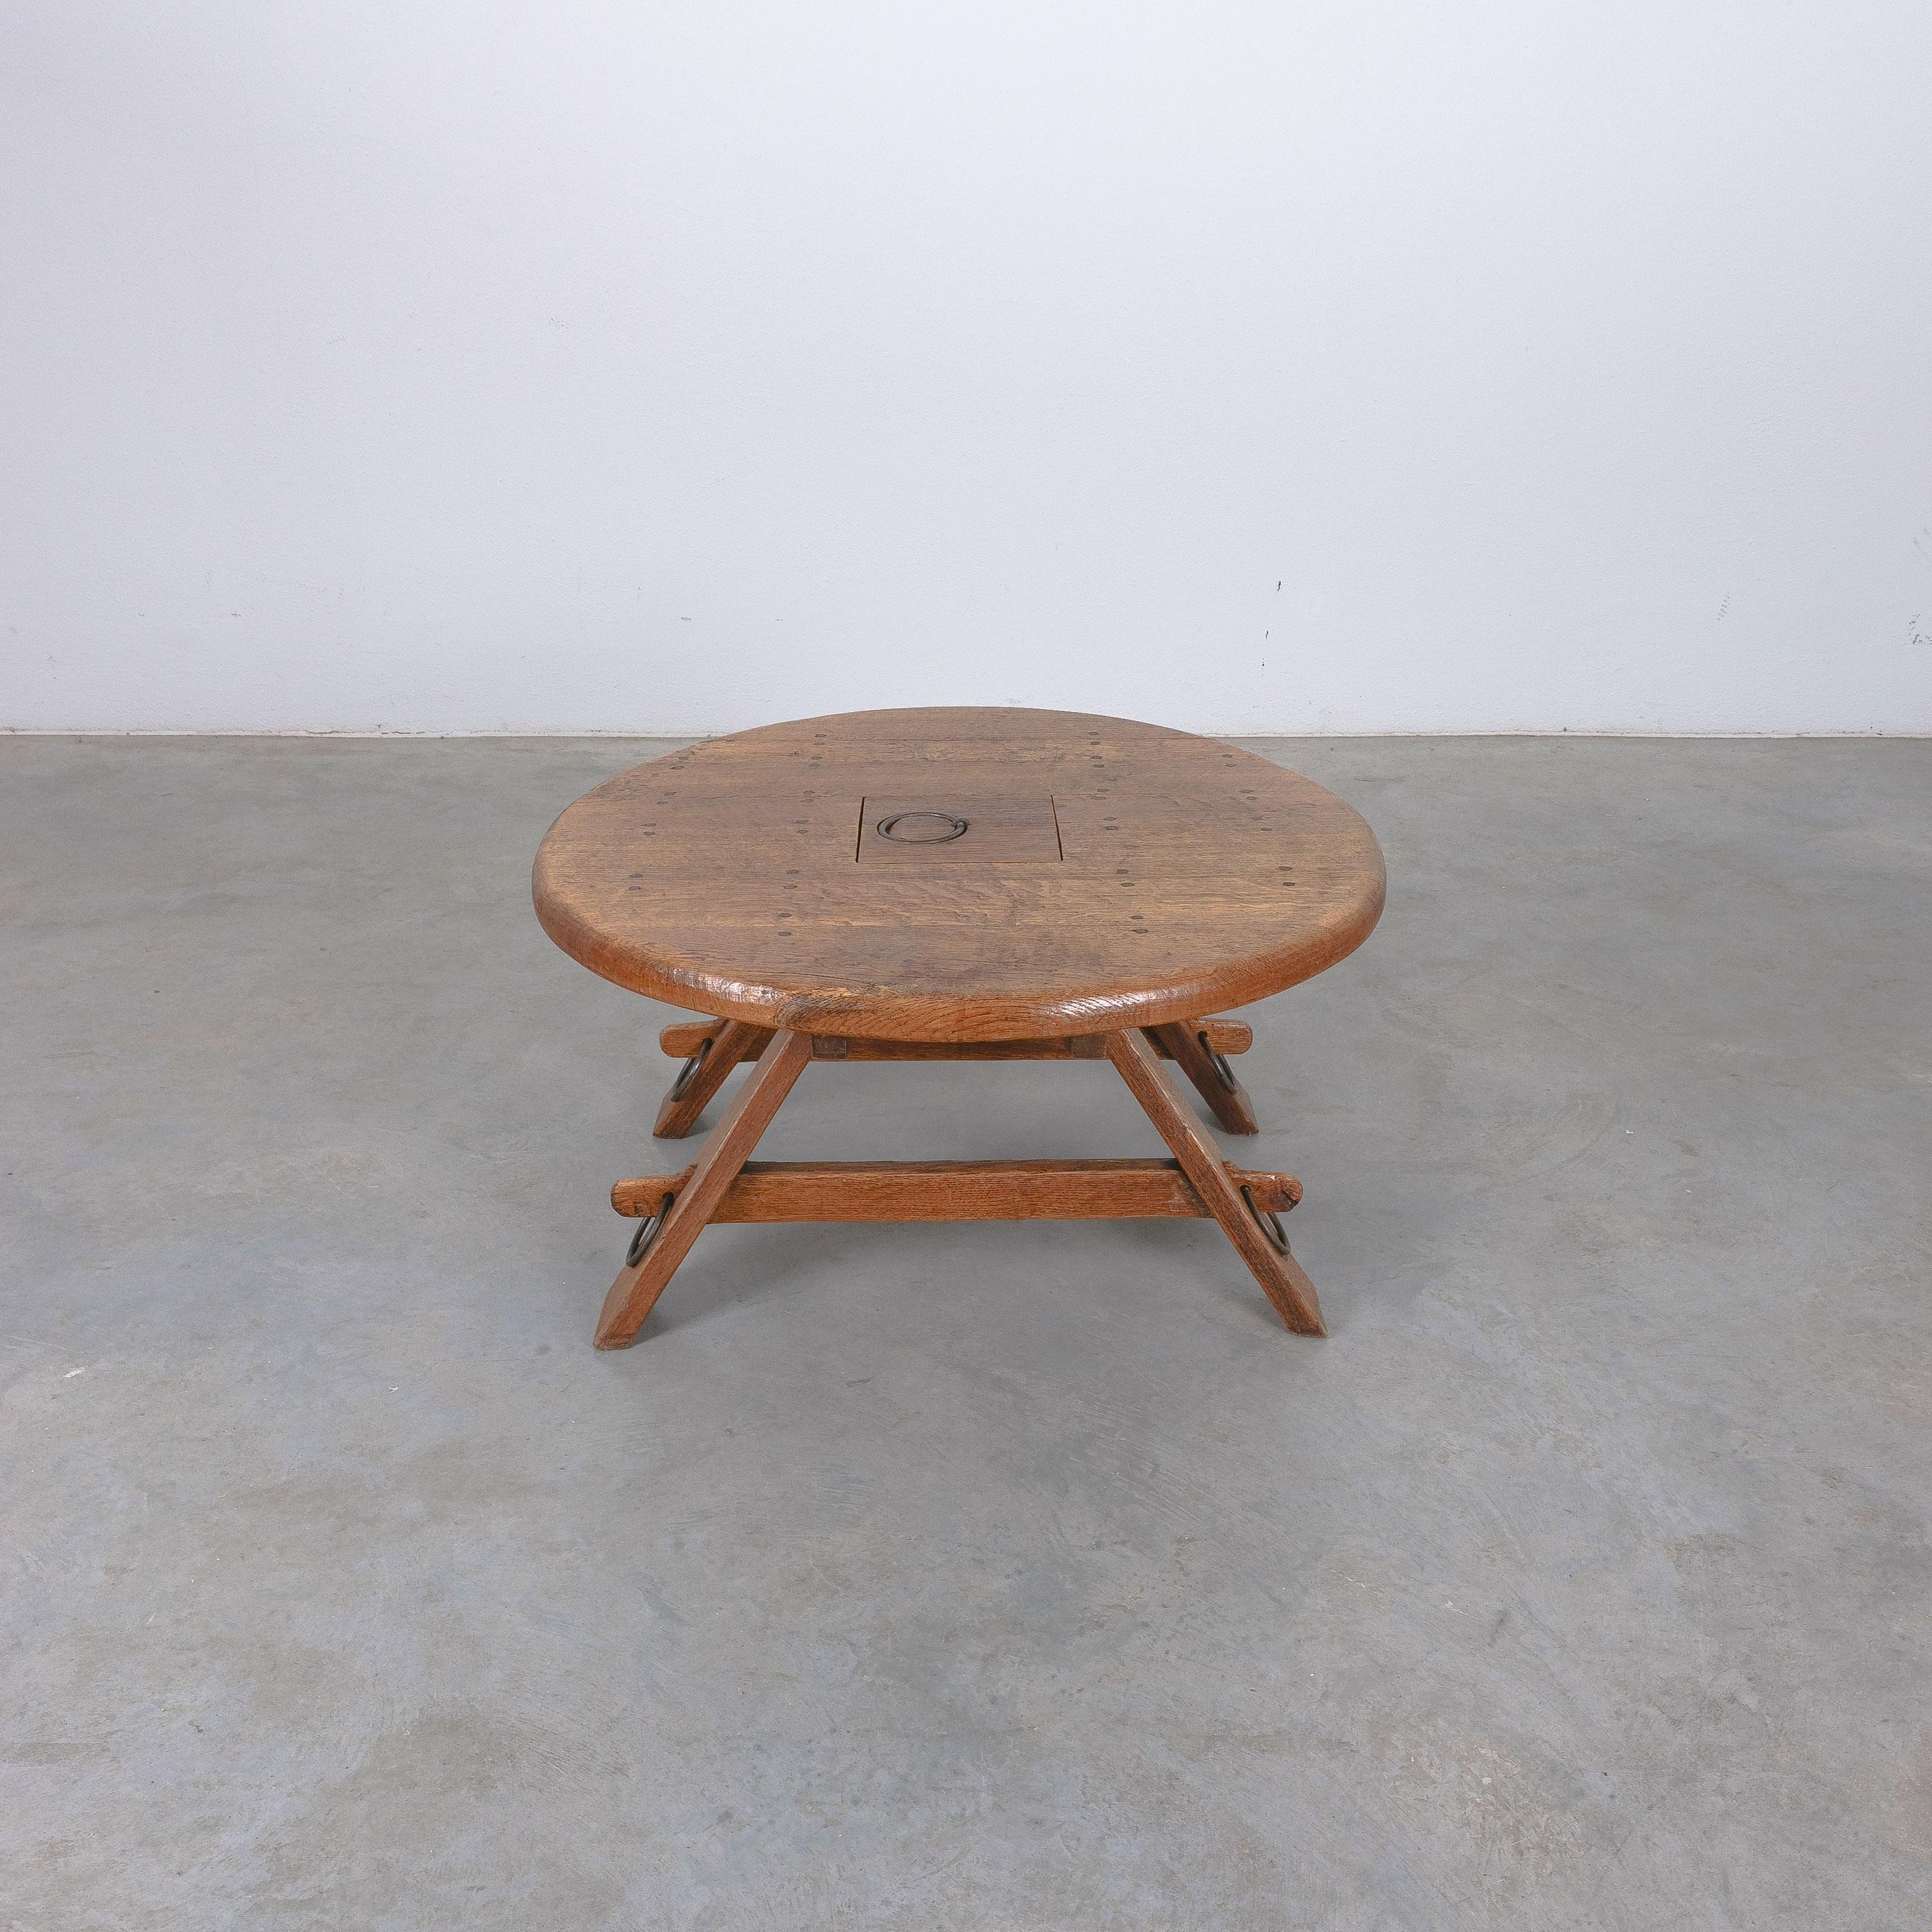 Brutalist Oak Coffee Table Carved Wood Artisan with Iron Details, France, 1950 For Sale 3